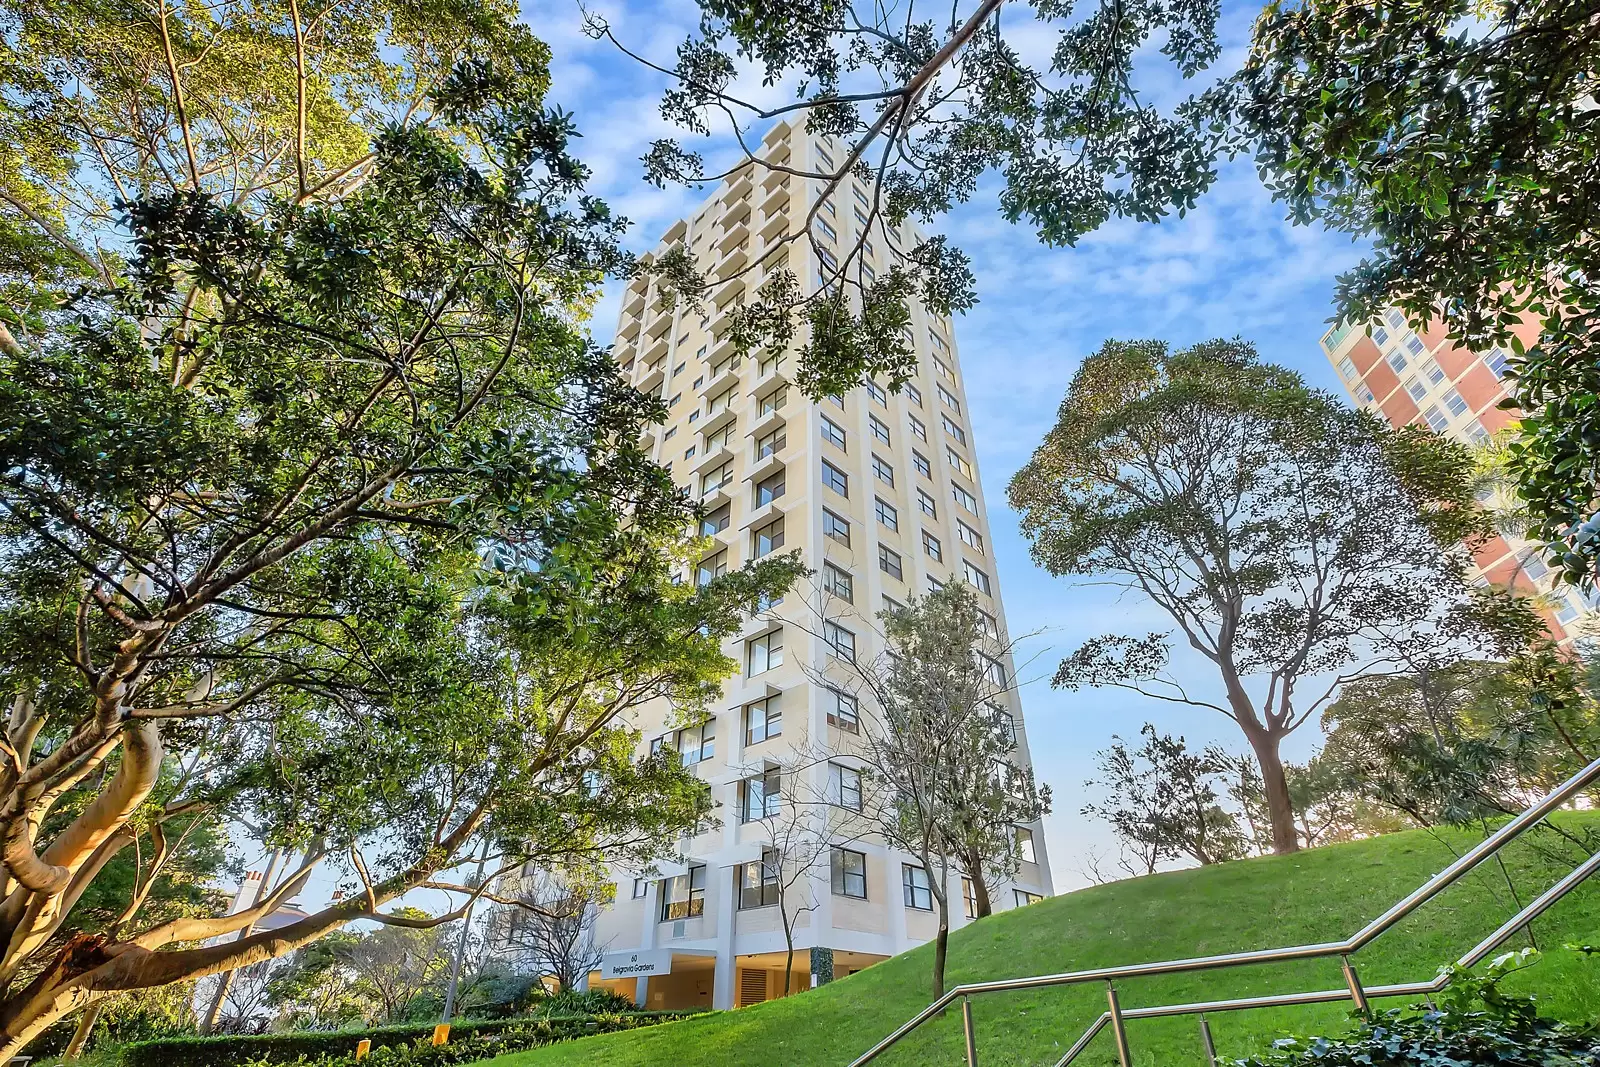 Photo #4: 11/60 Darling Point Road, Darling Point - Sold by Sydney Sotheby's International Realty